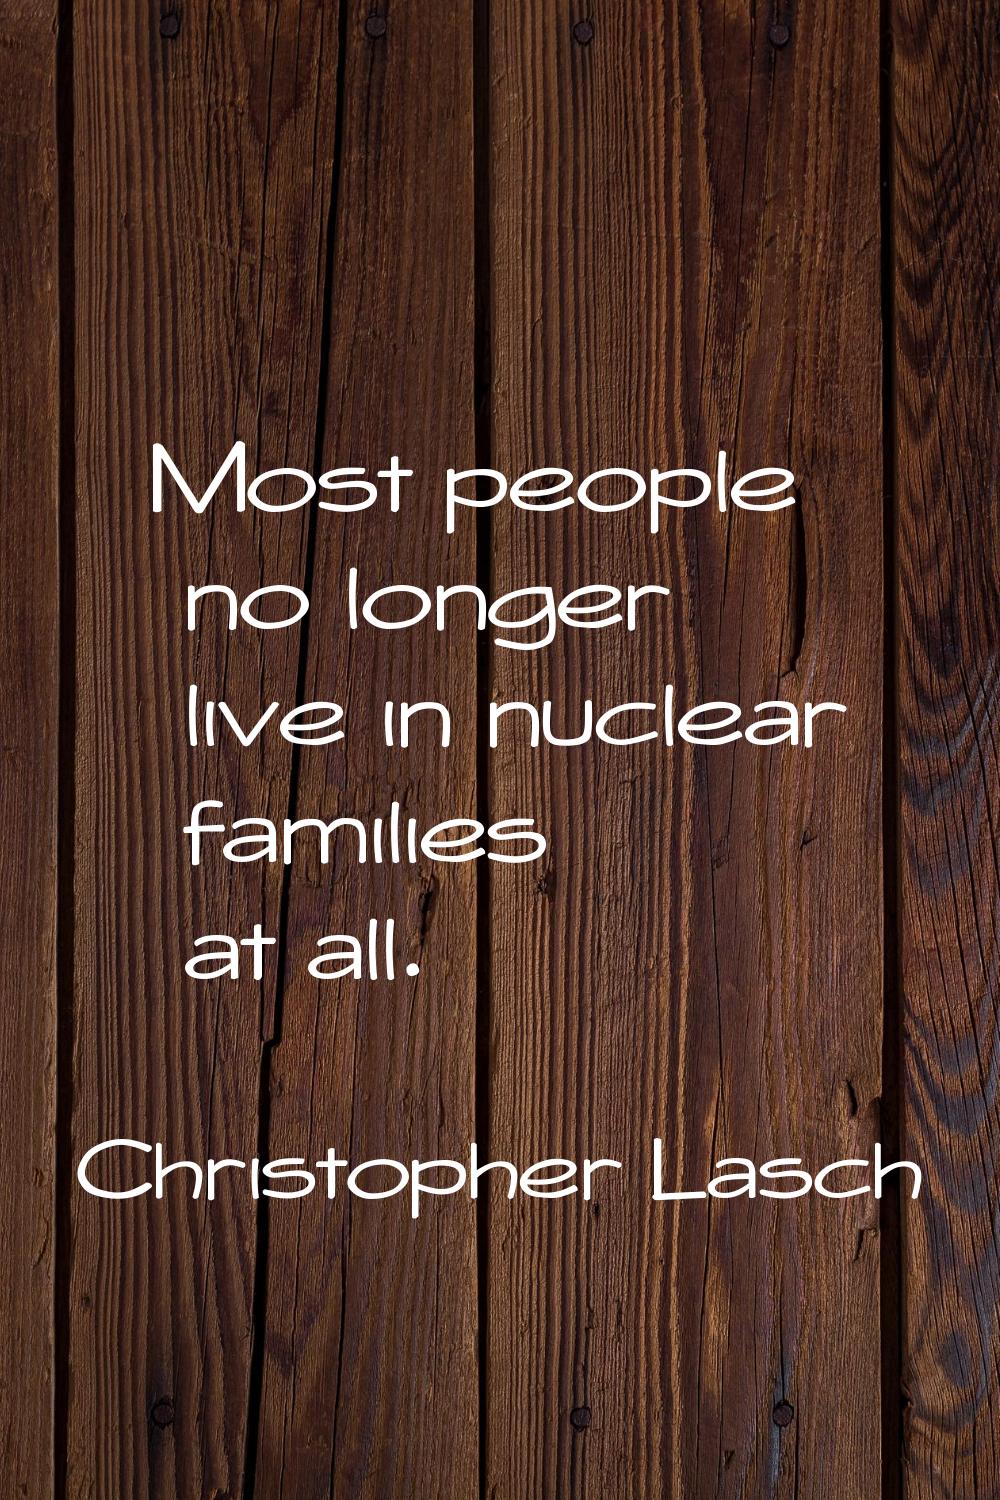 Most people no longer live in nuclear families at all.